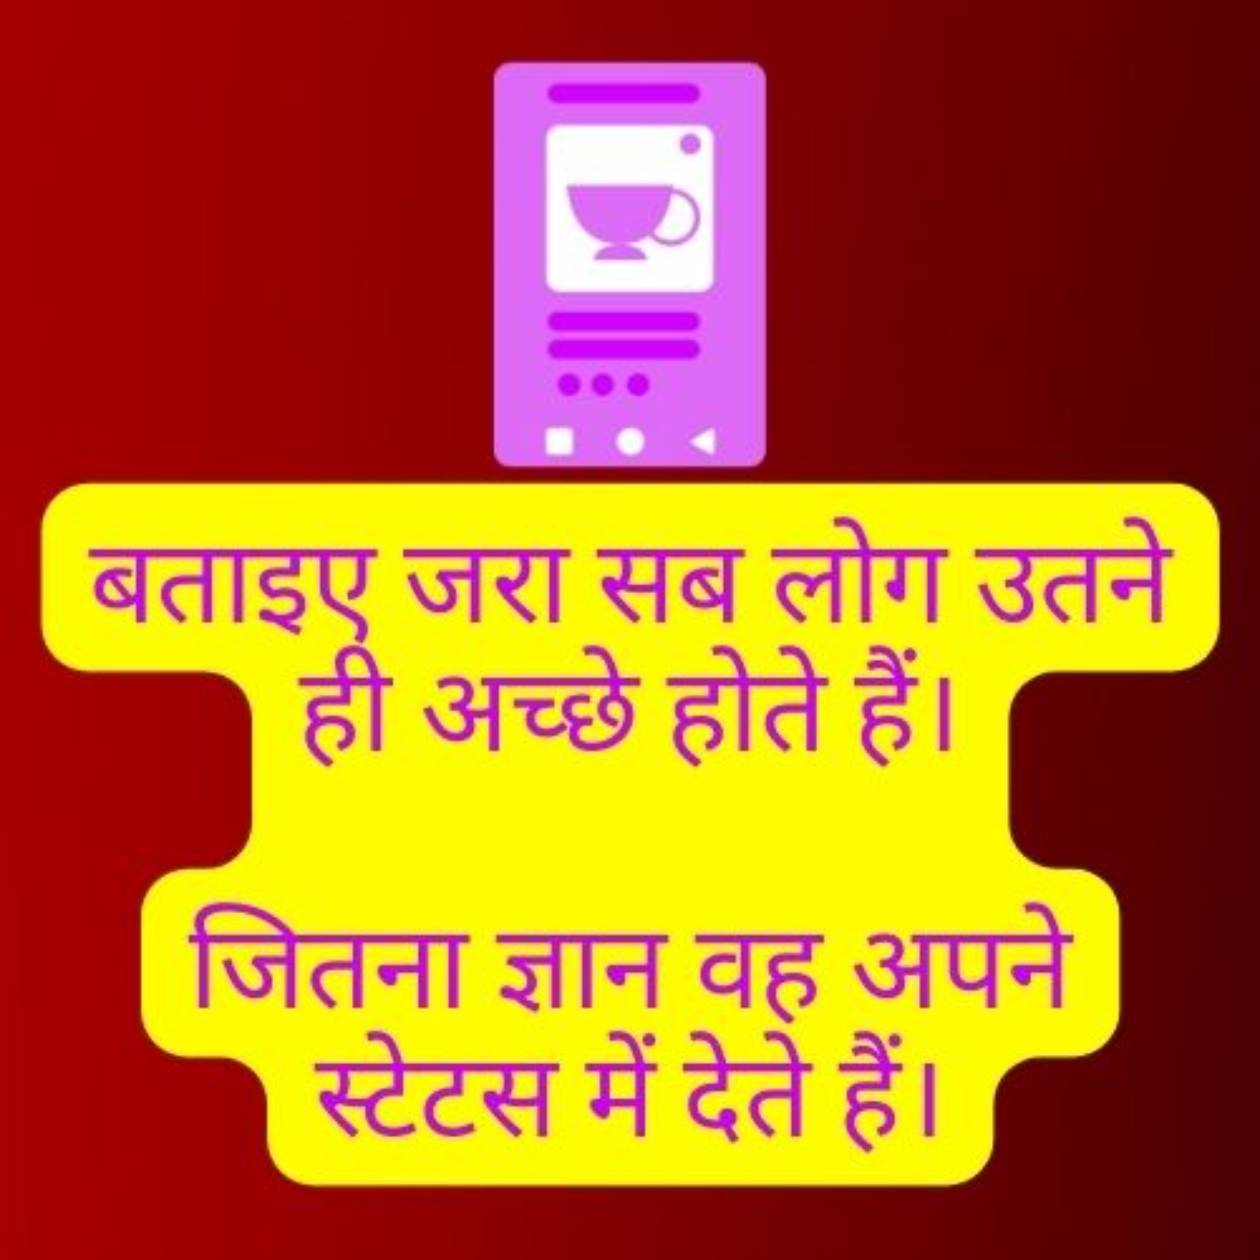 A mobile animation and funny text in Hindi about mobile status.